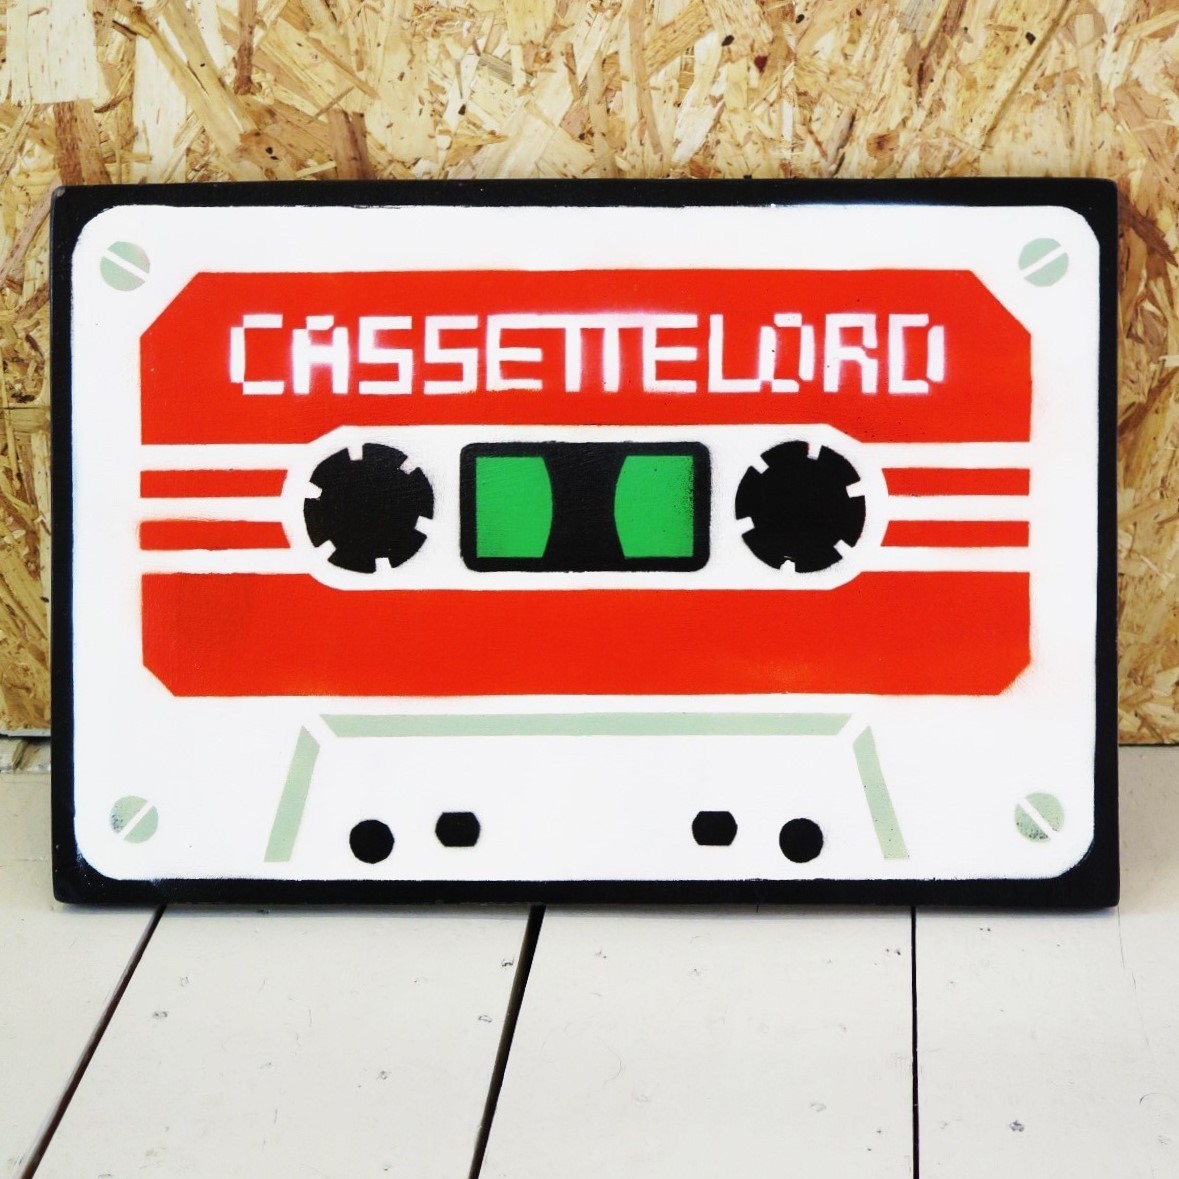 Cassette Lord